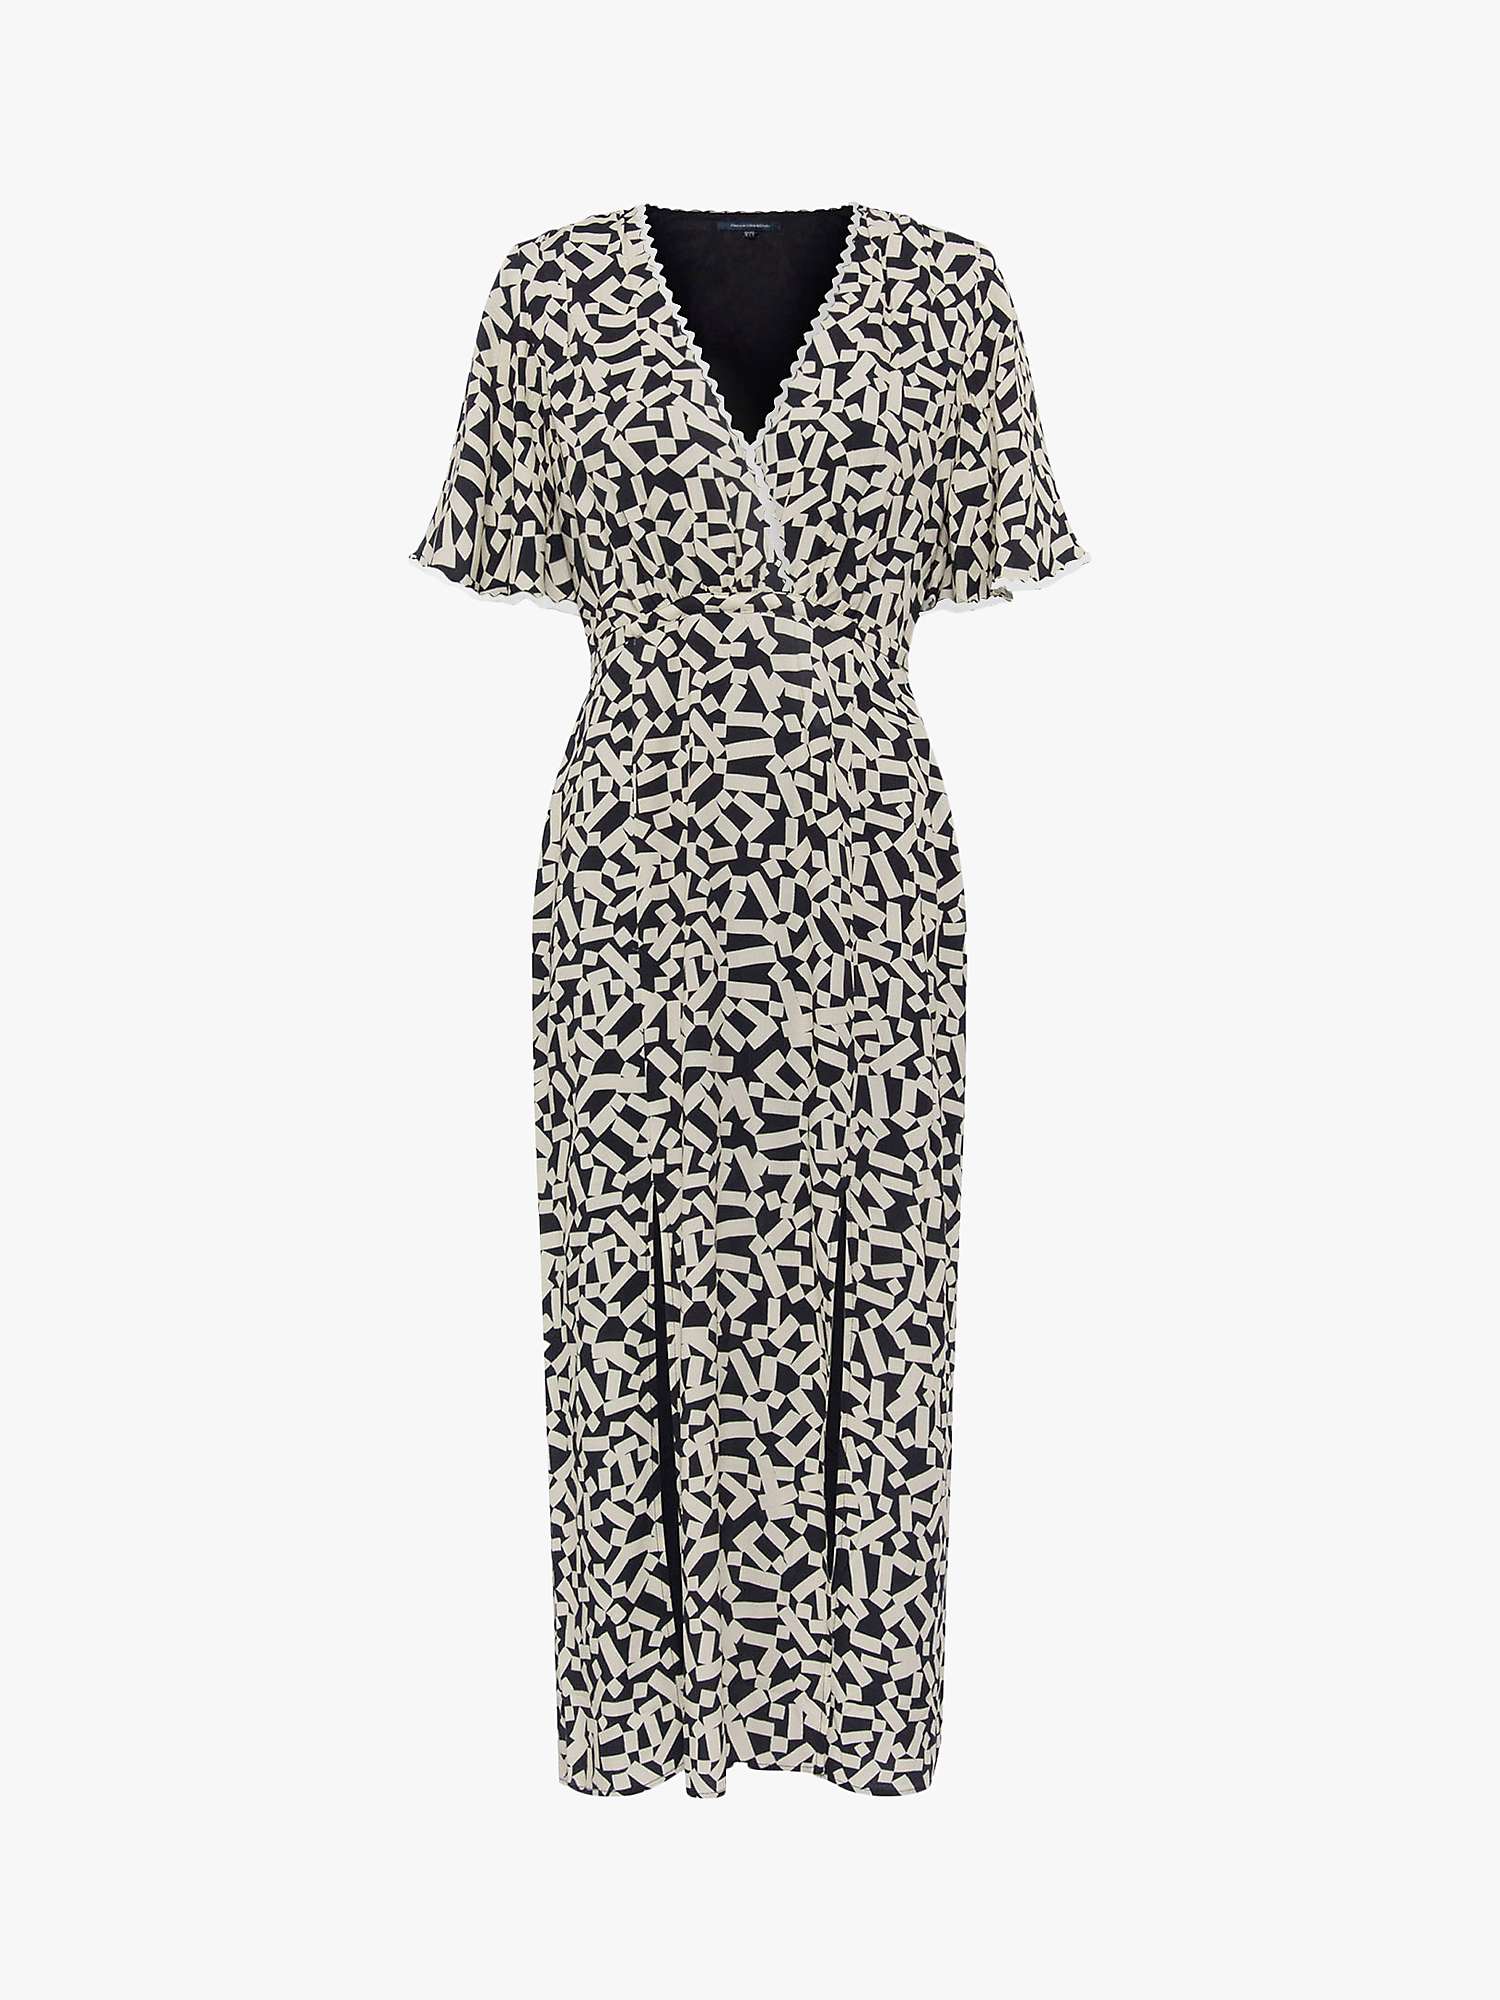 Buy French Connection Helena Rick Rack Midi Dress, Utility Blue/Class Cream Online at johnlewis.com